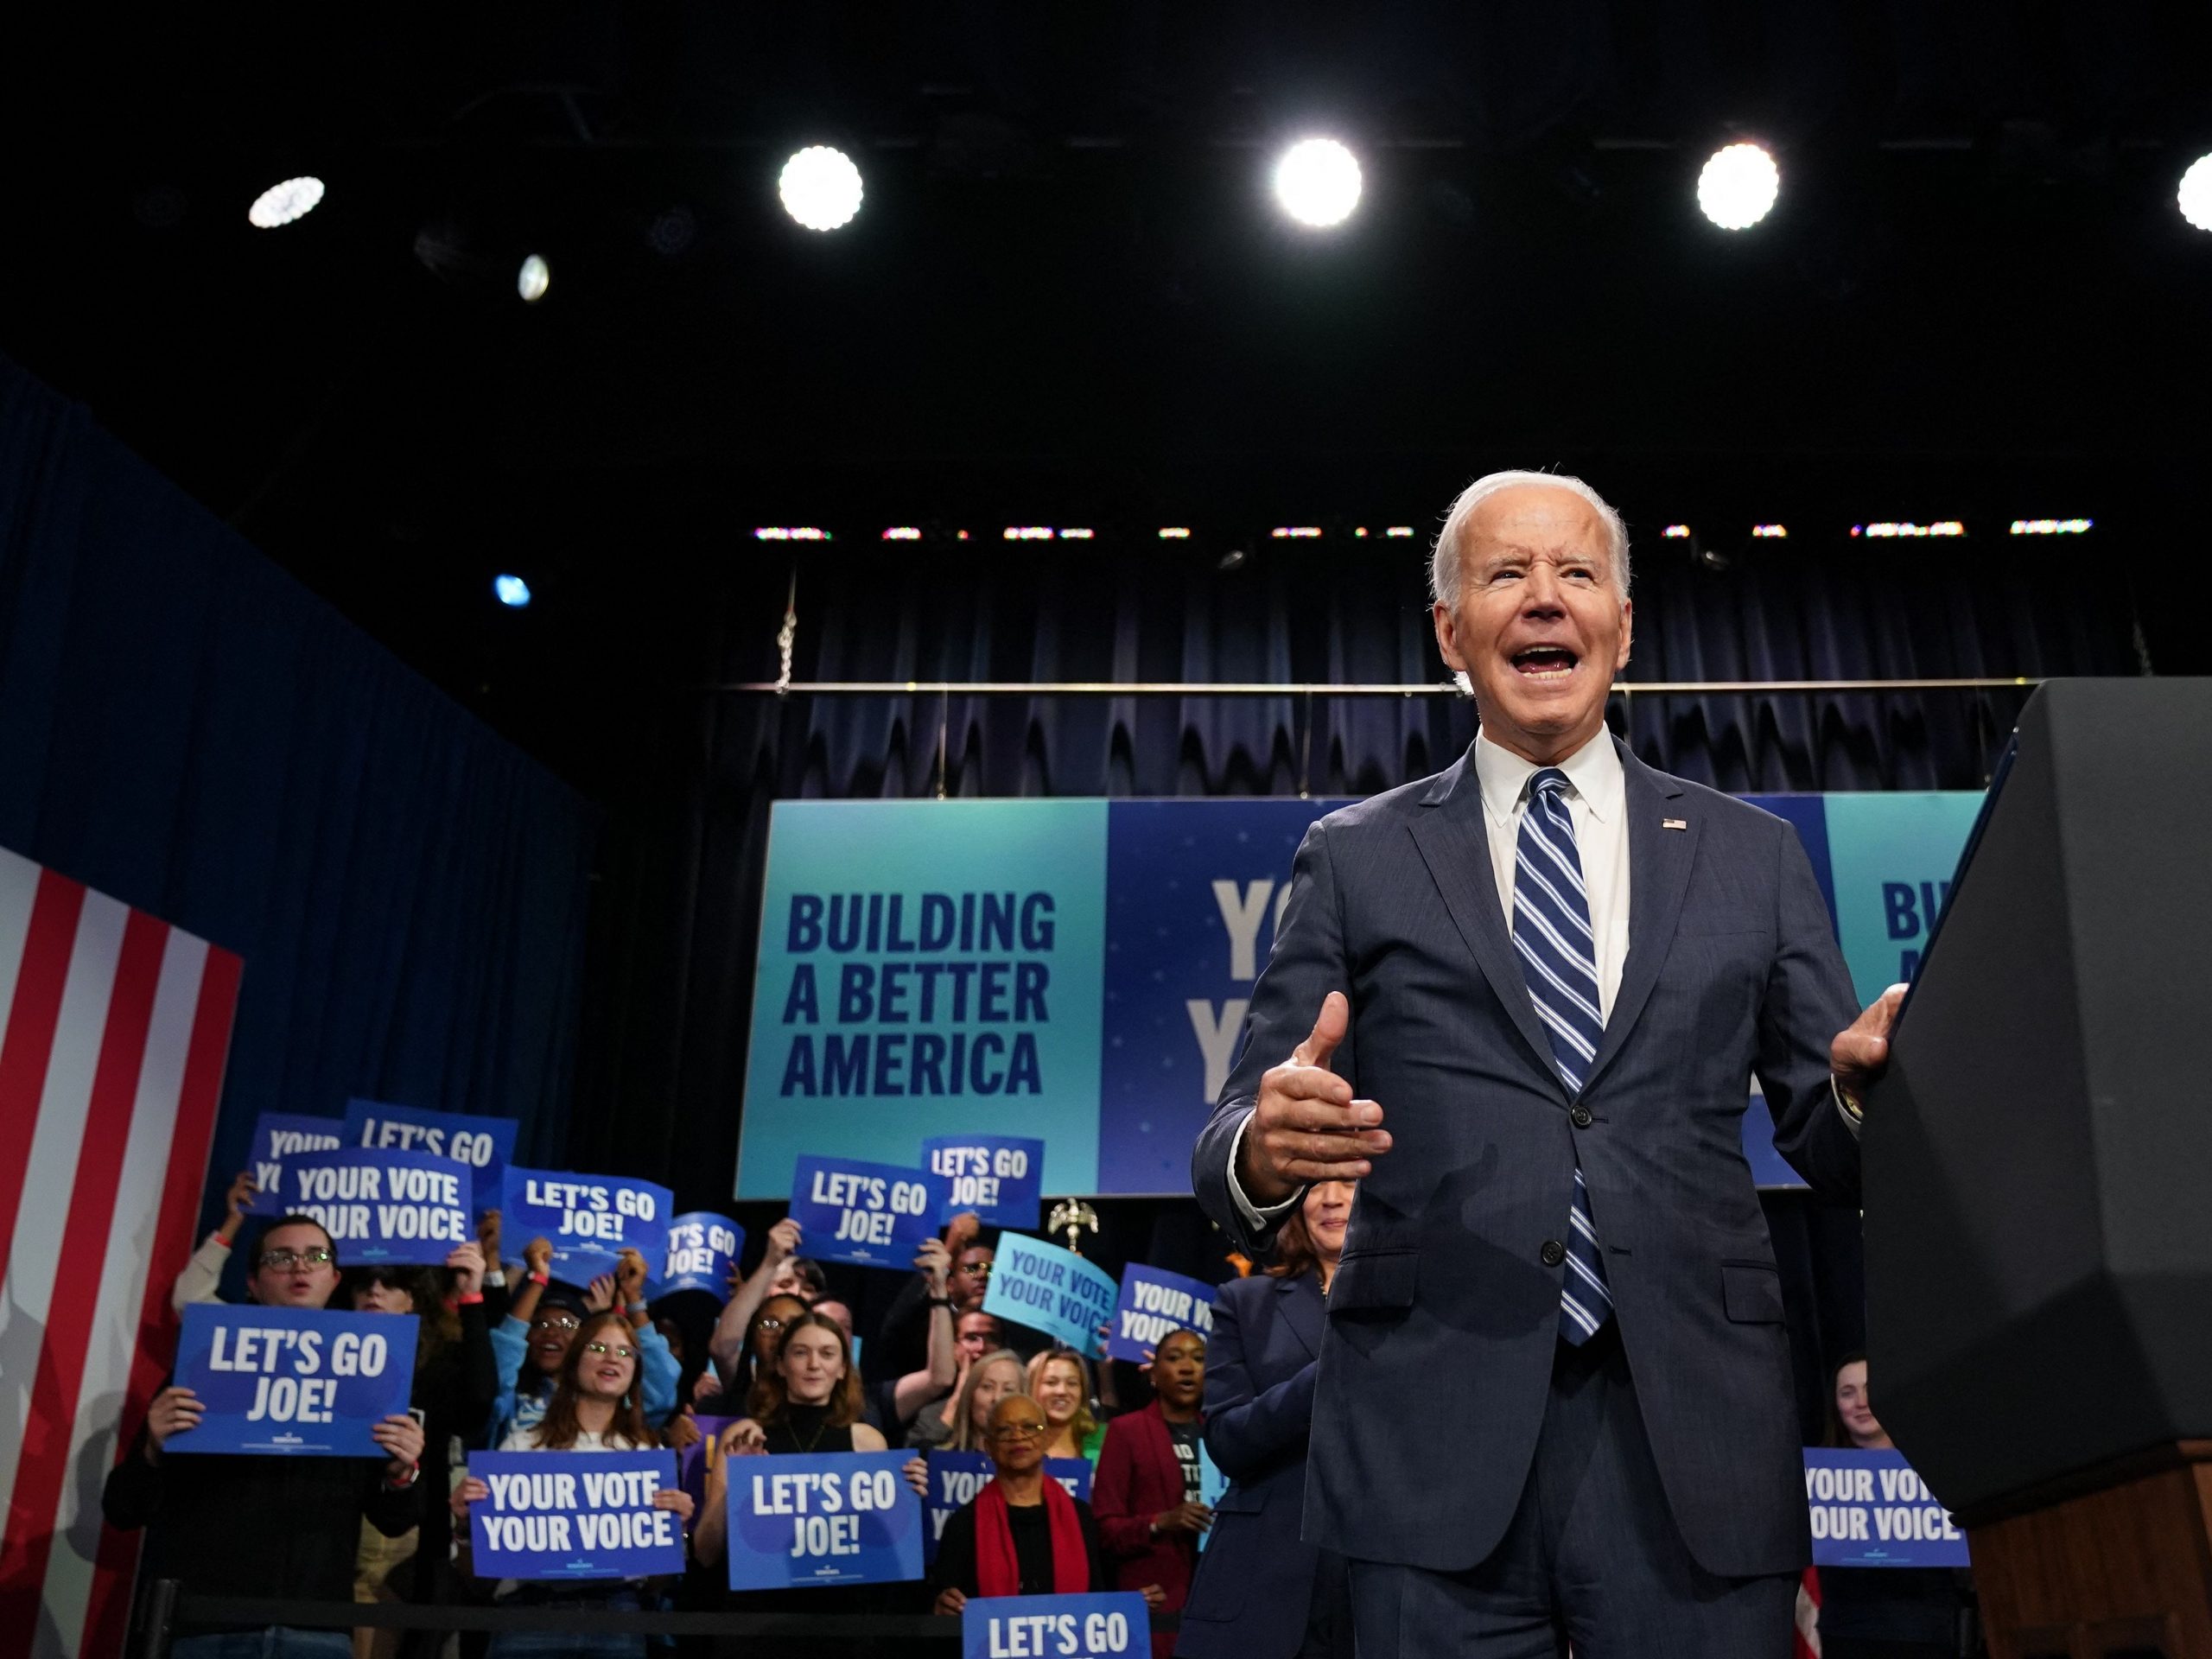 US President Joe Biden speaks at an event hosted by the Democratic National Committee to thank campaign workers, at Howard Theatre in Washington, DC, November 10, 2022. (Photo by Mandel NGAN / AFP) (Photo by MANDEL NGAN/AFP via Getty Images)